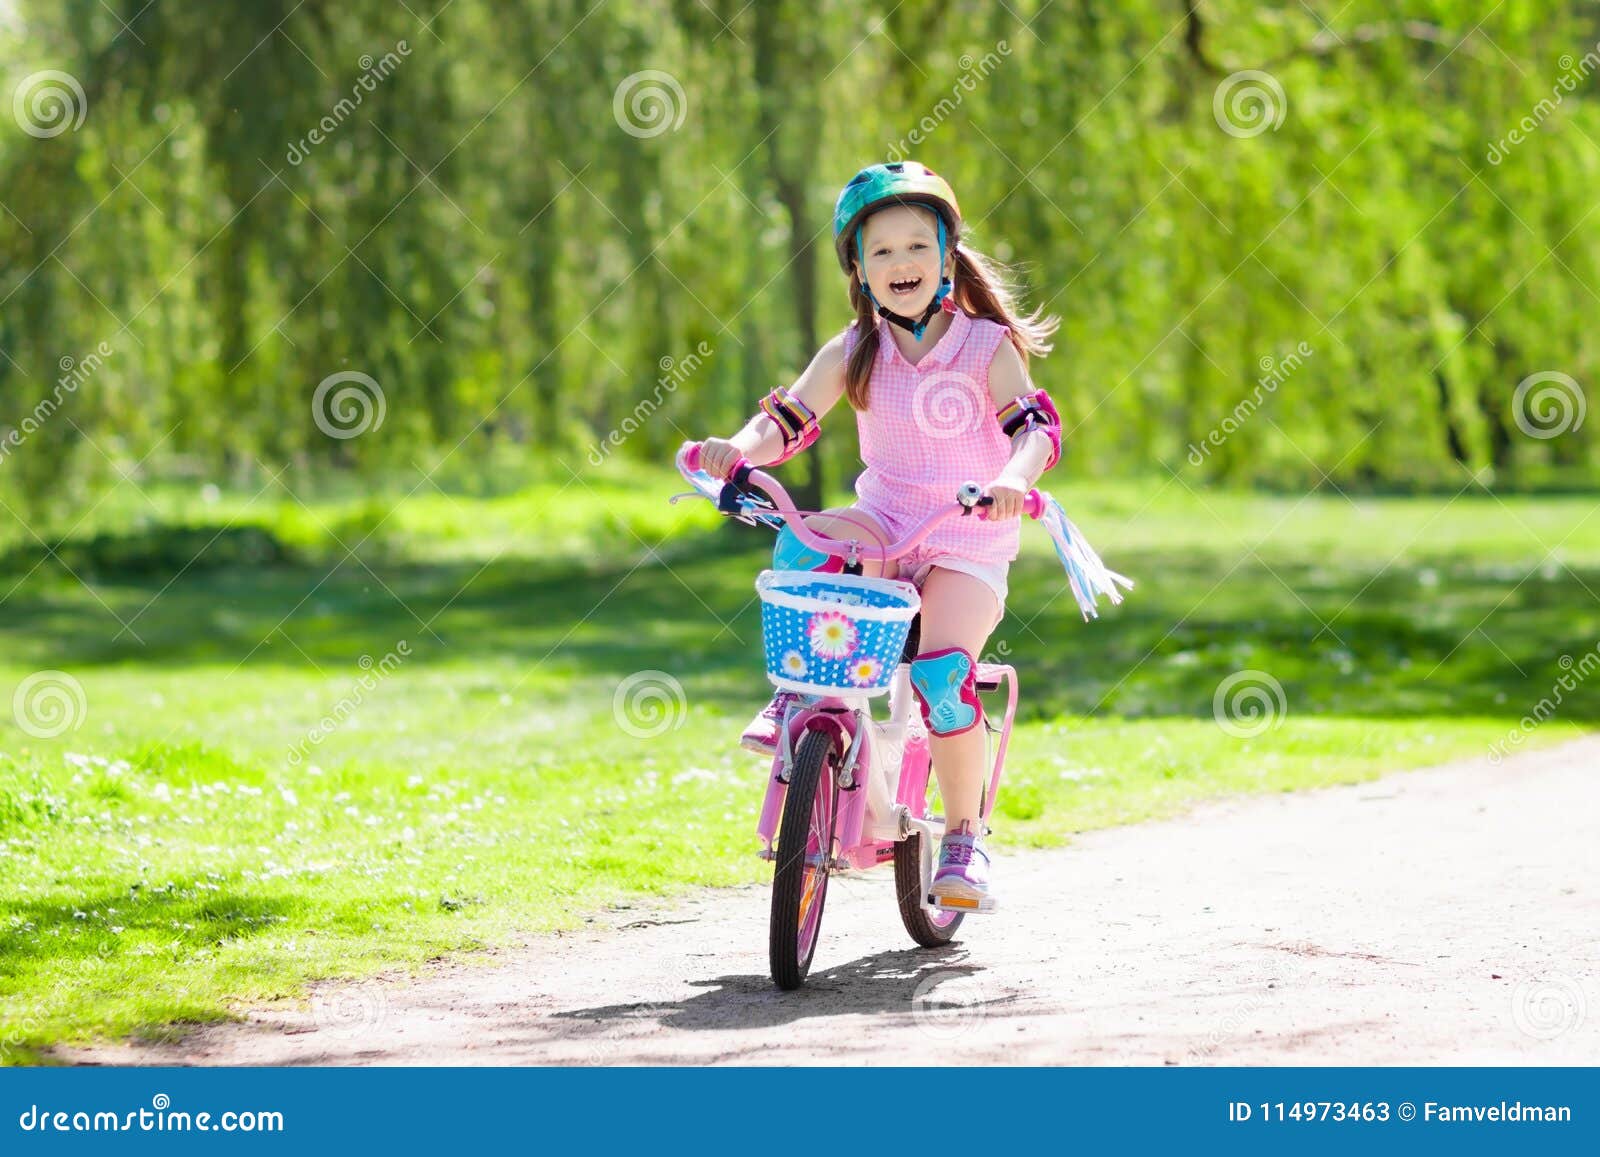 bicycle without training wheels